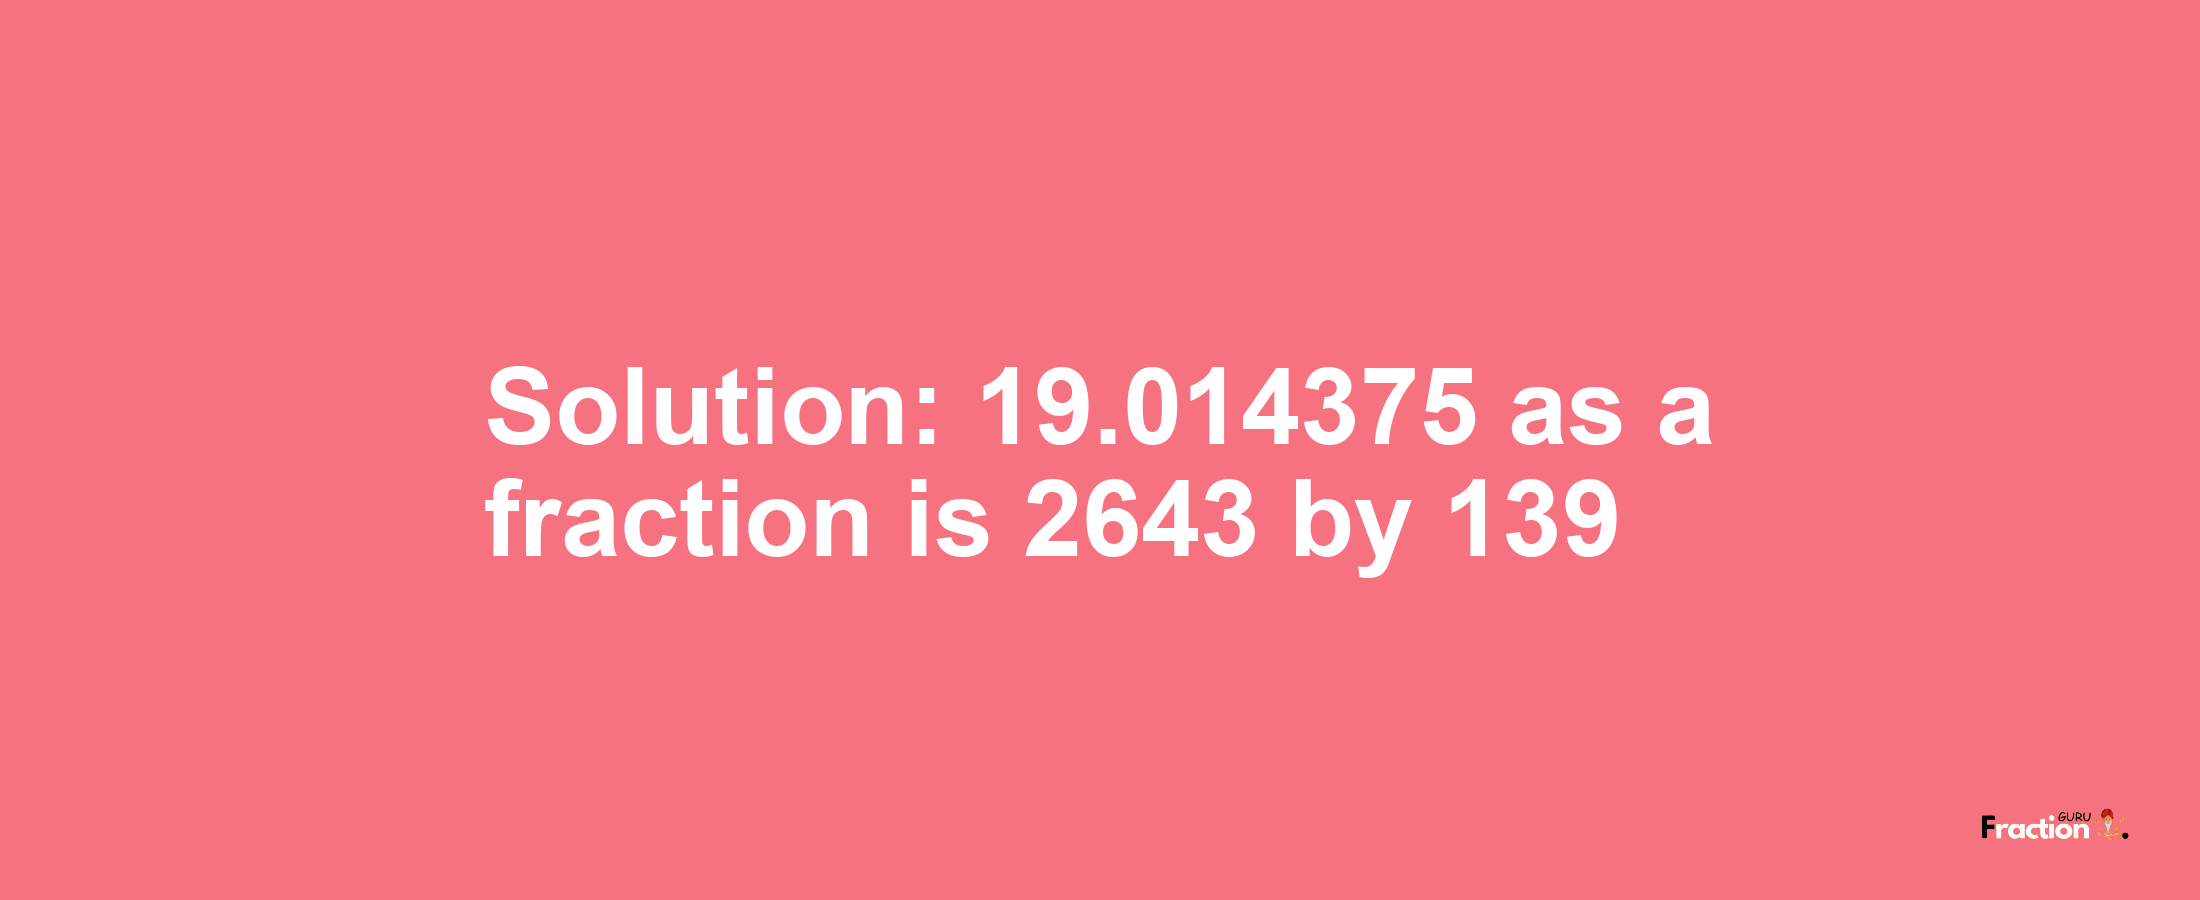 Solution:19.014375 as a fraction is 2643/139